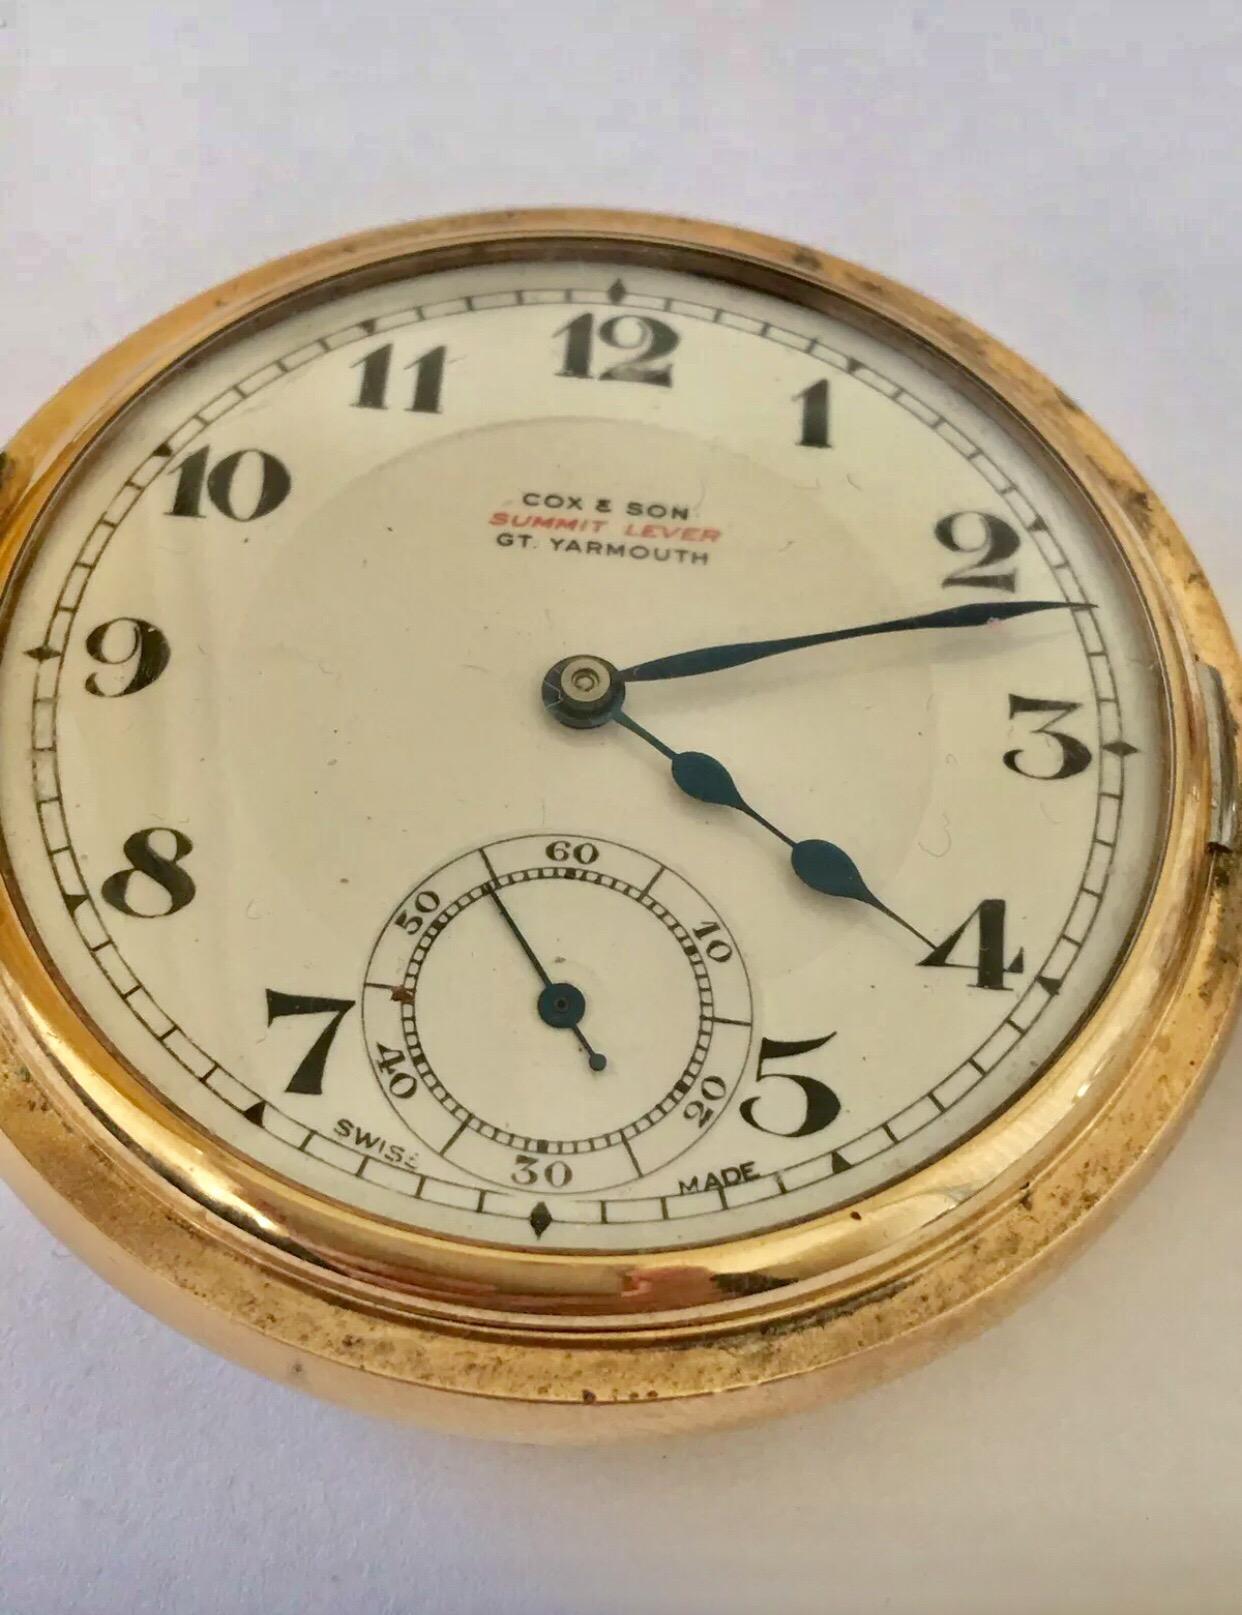 Antique Gold-Plated Half Hunter Pocket Watch Signed Cox & Son, GT Yarmouth 5